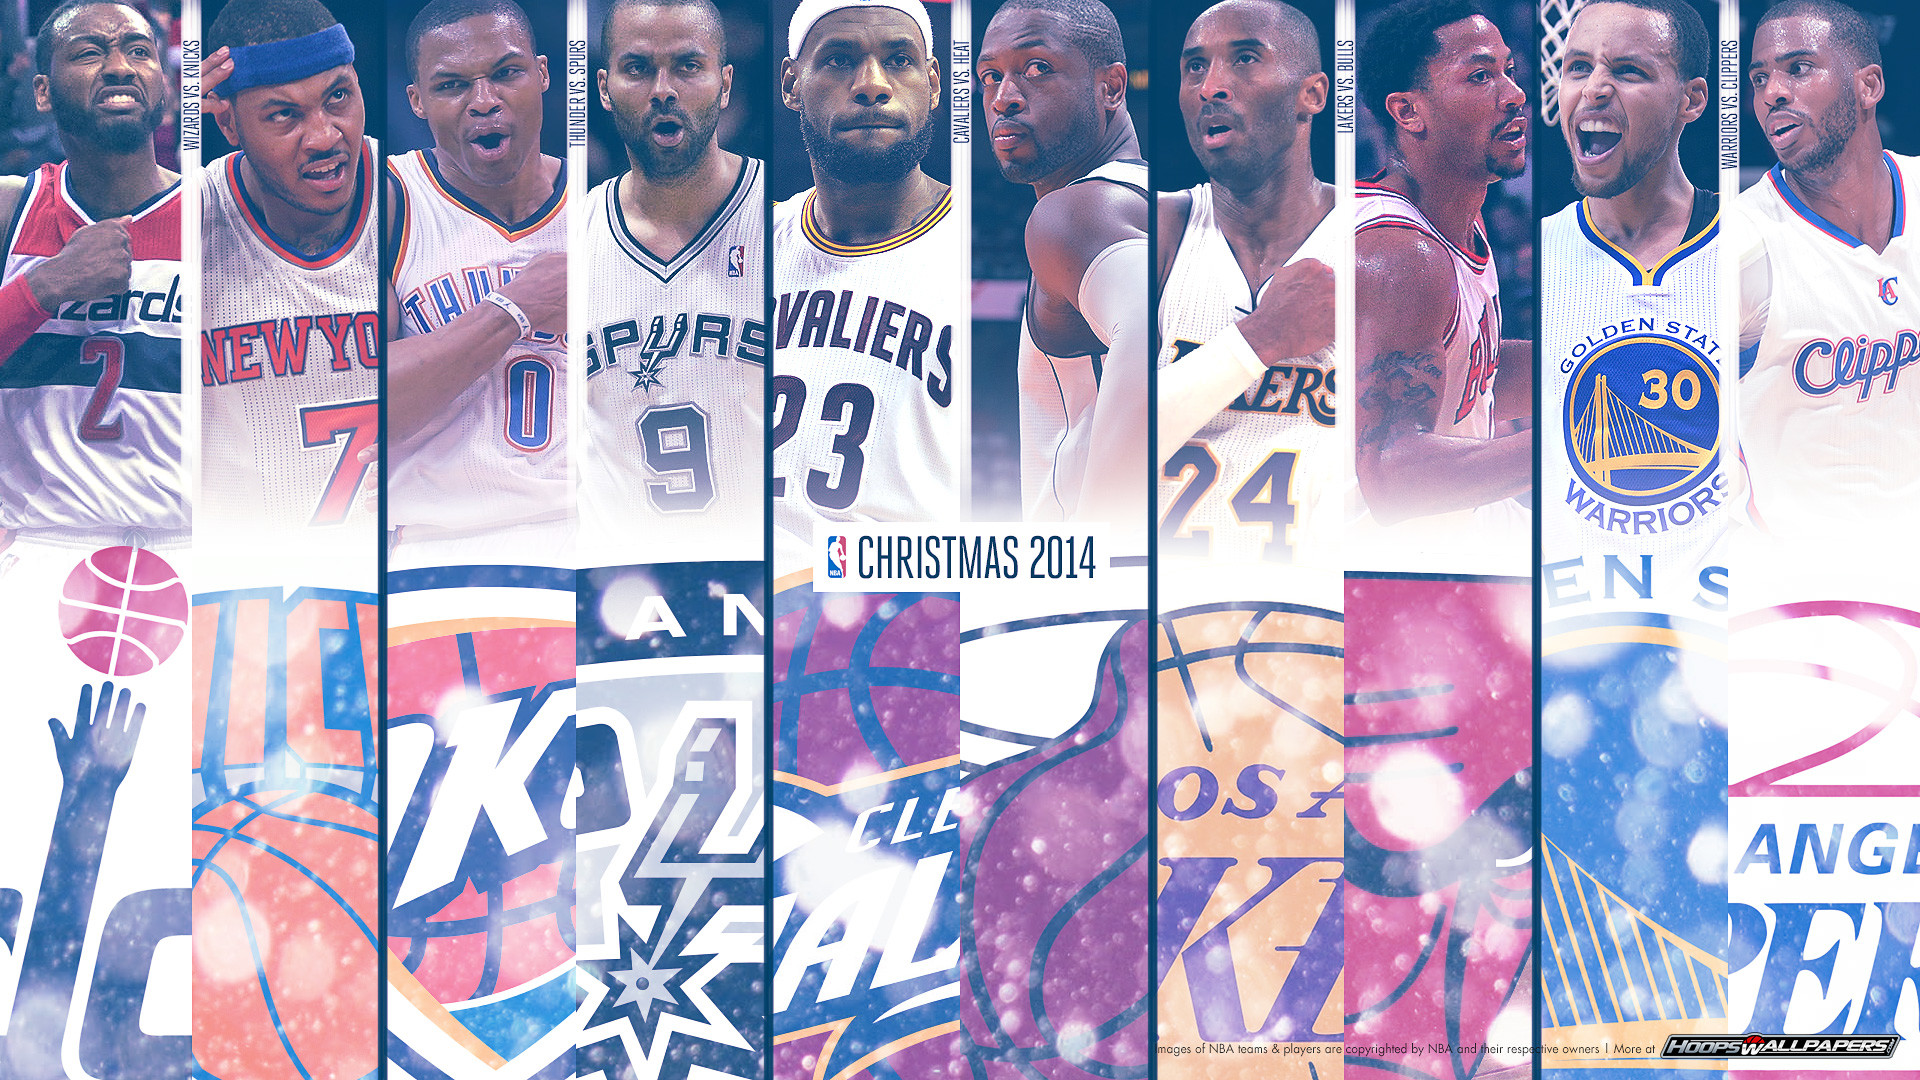 1920x1080 Free NBA Wallpapers At HoopsWallpapers.com; Newest NBA And ..